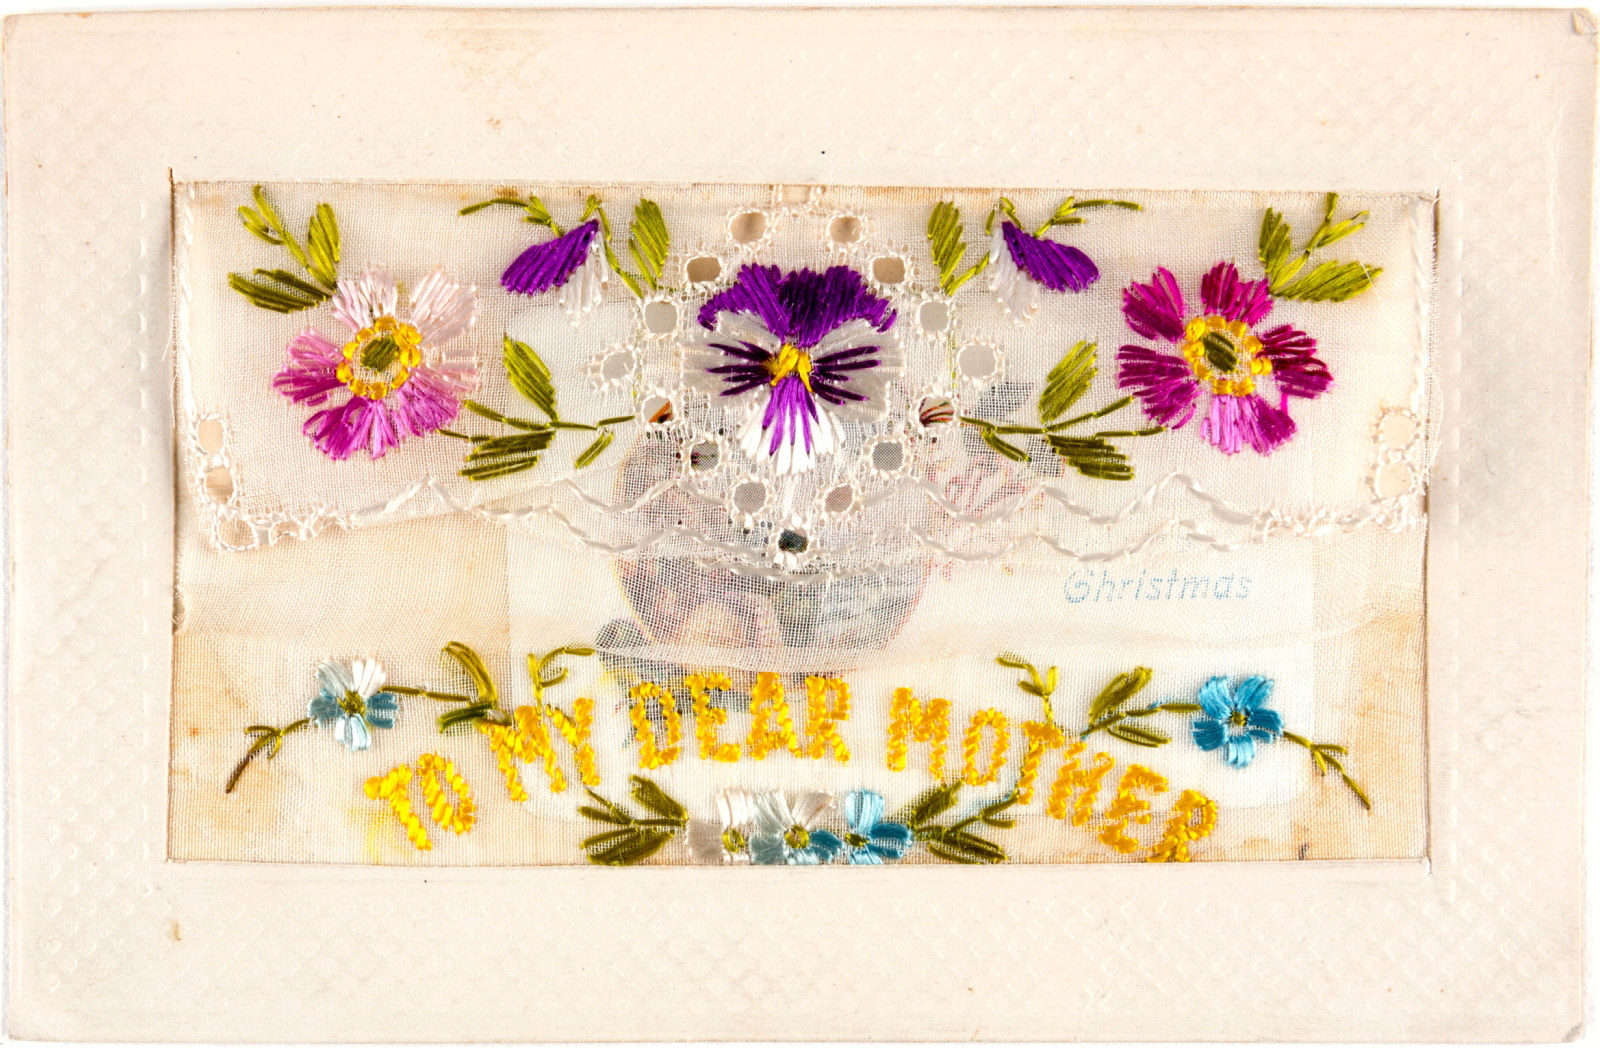 Embroidered silk postcard addressed to Adelaide (Ada) Gallagher from her son Frank [1915]